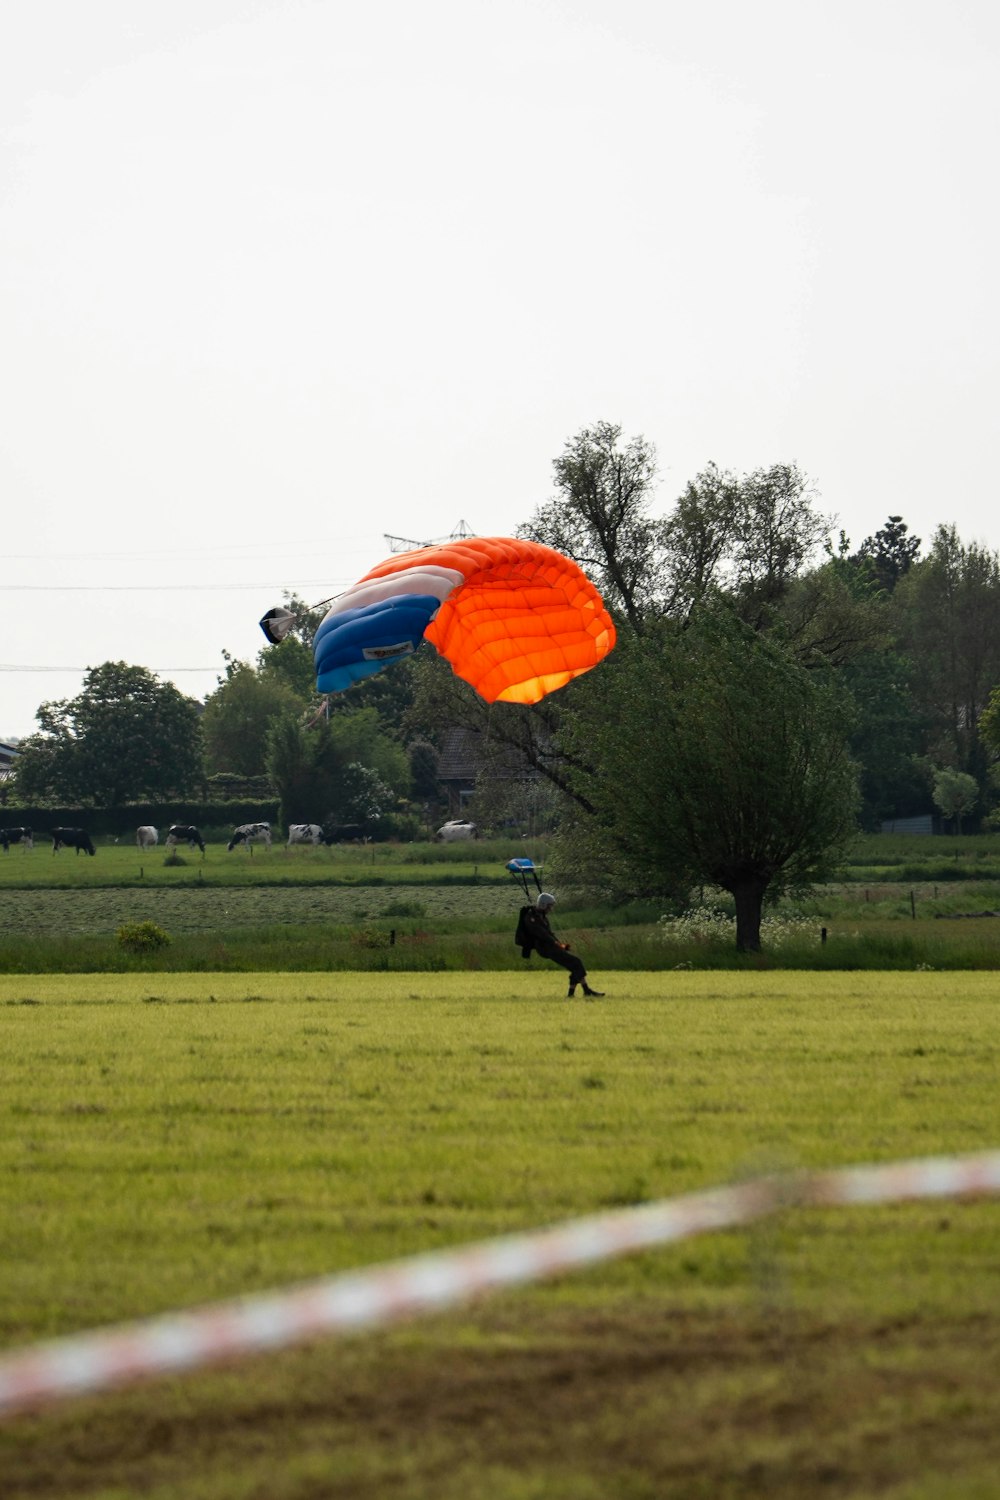 a person is flying a kite in a field